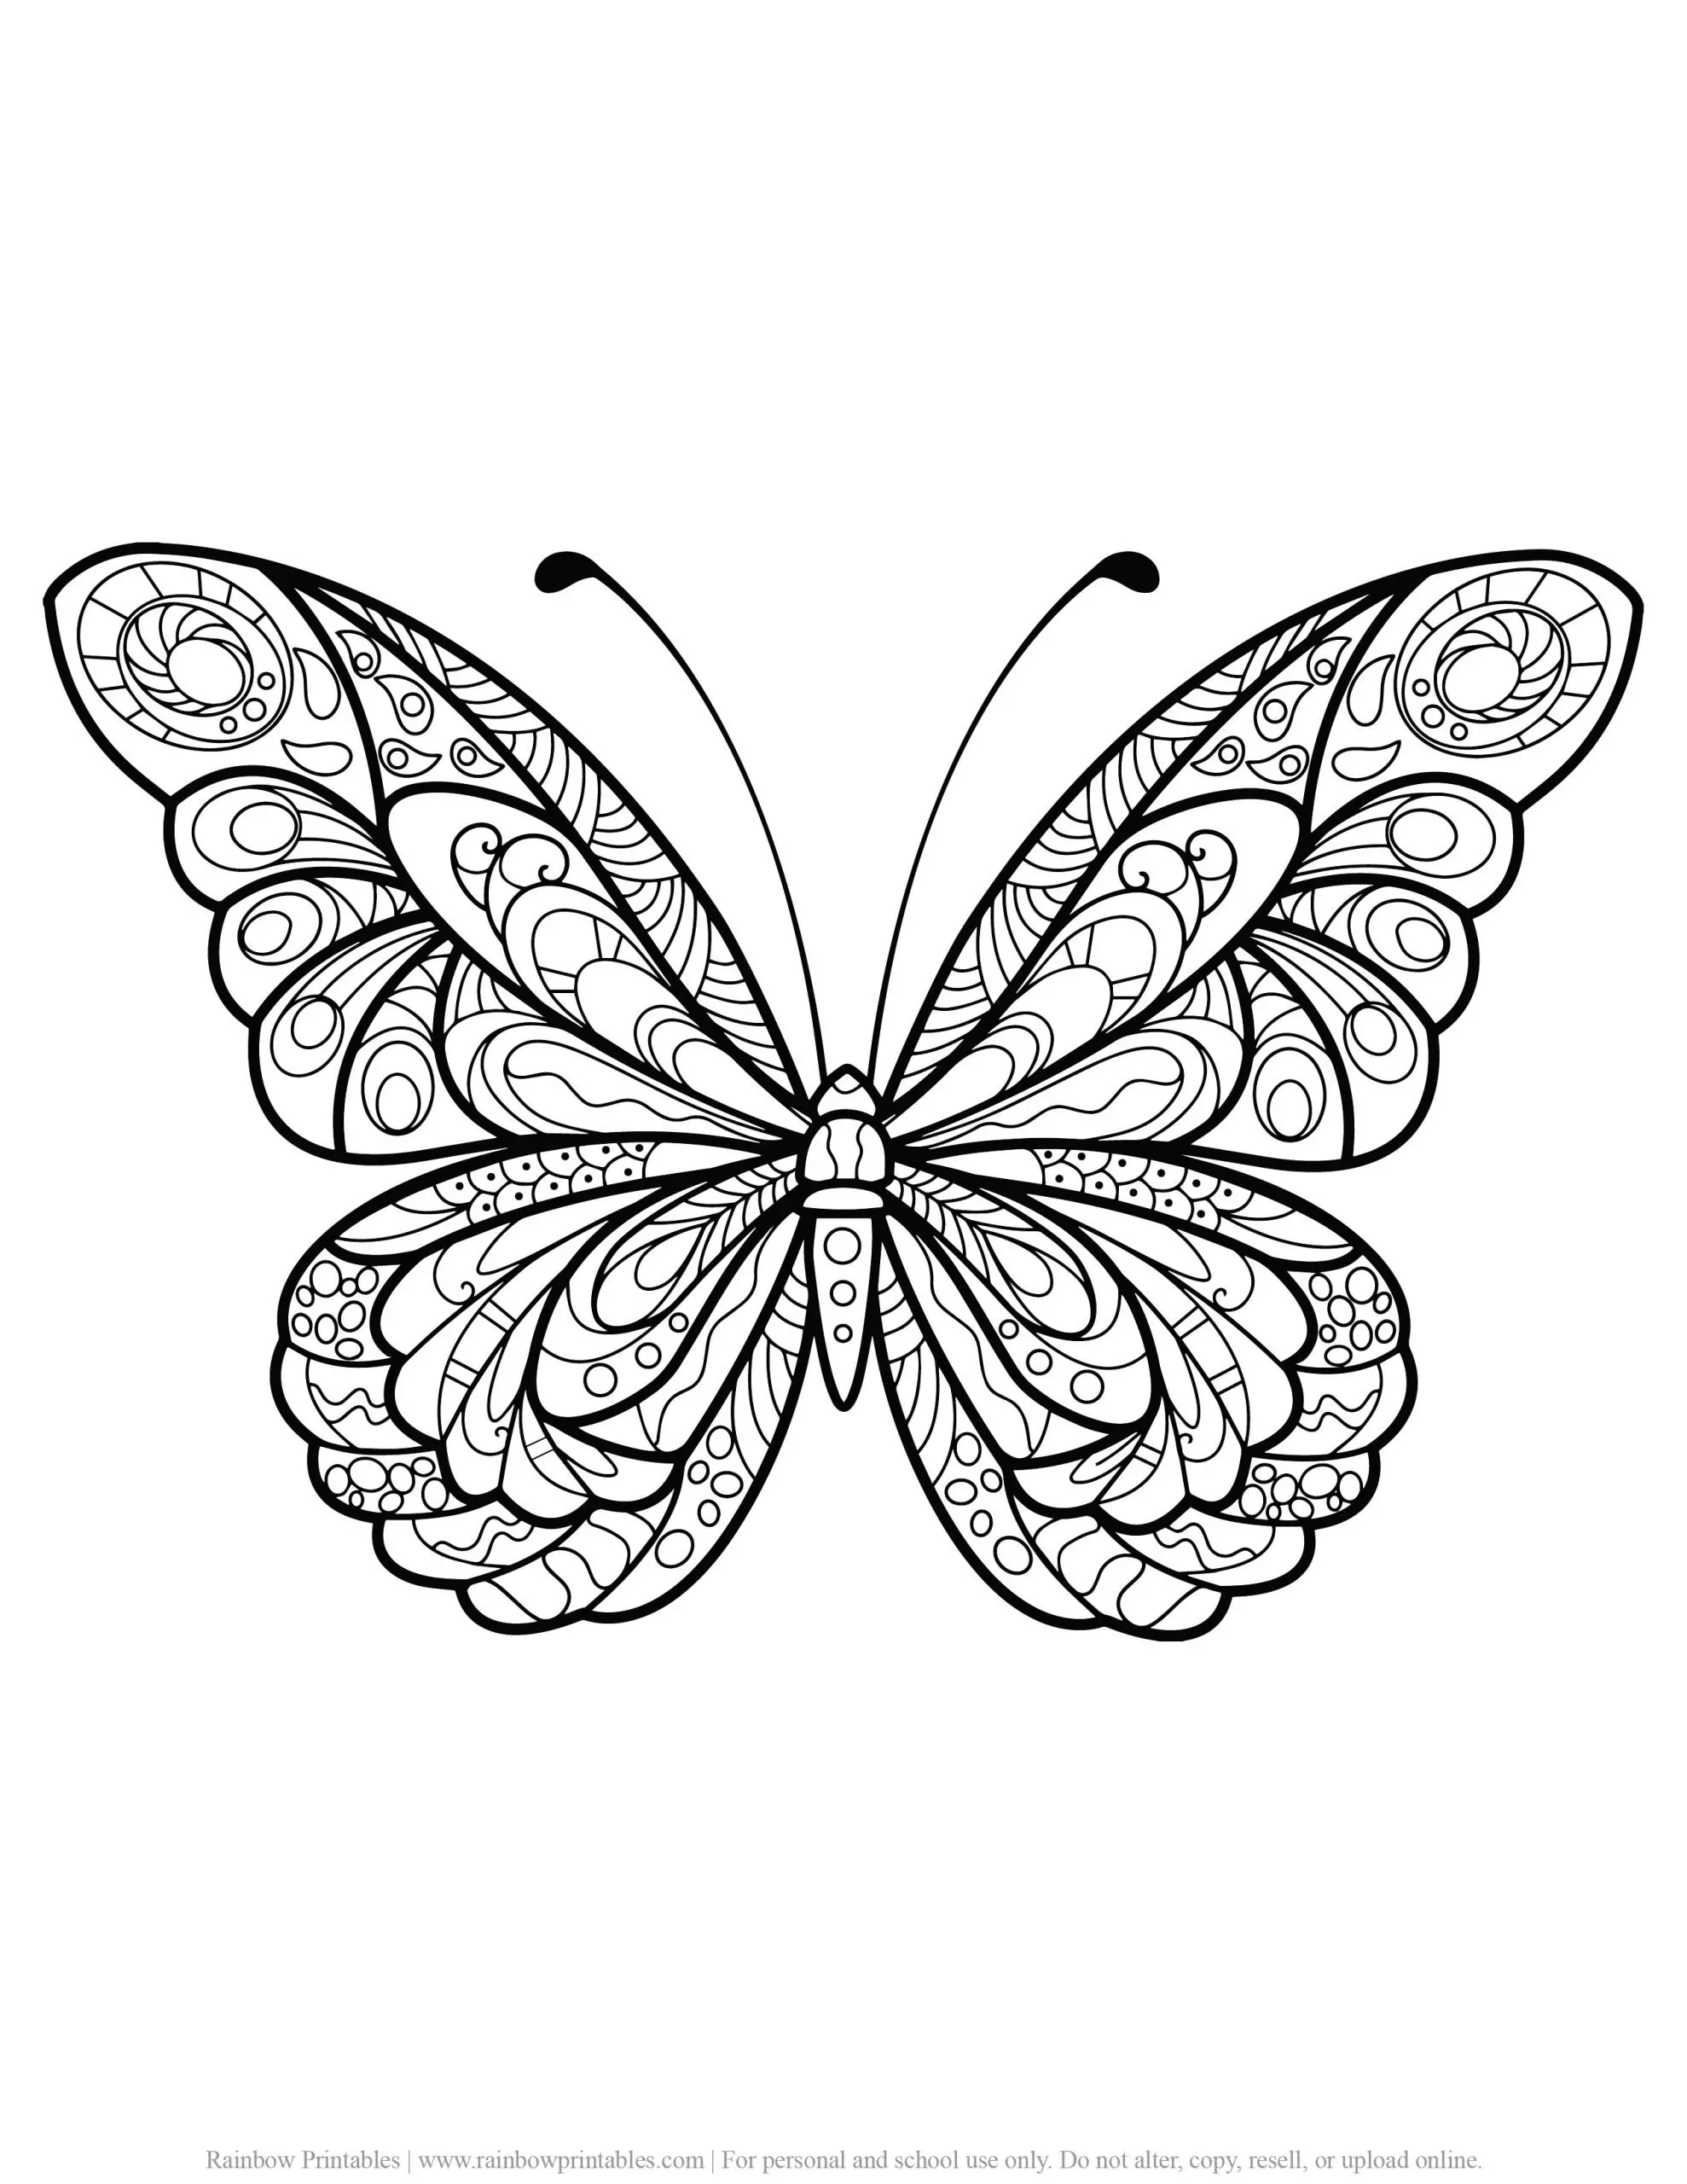 Butterfly Mandala Pattern Coloring Page   Rainbow Printables